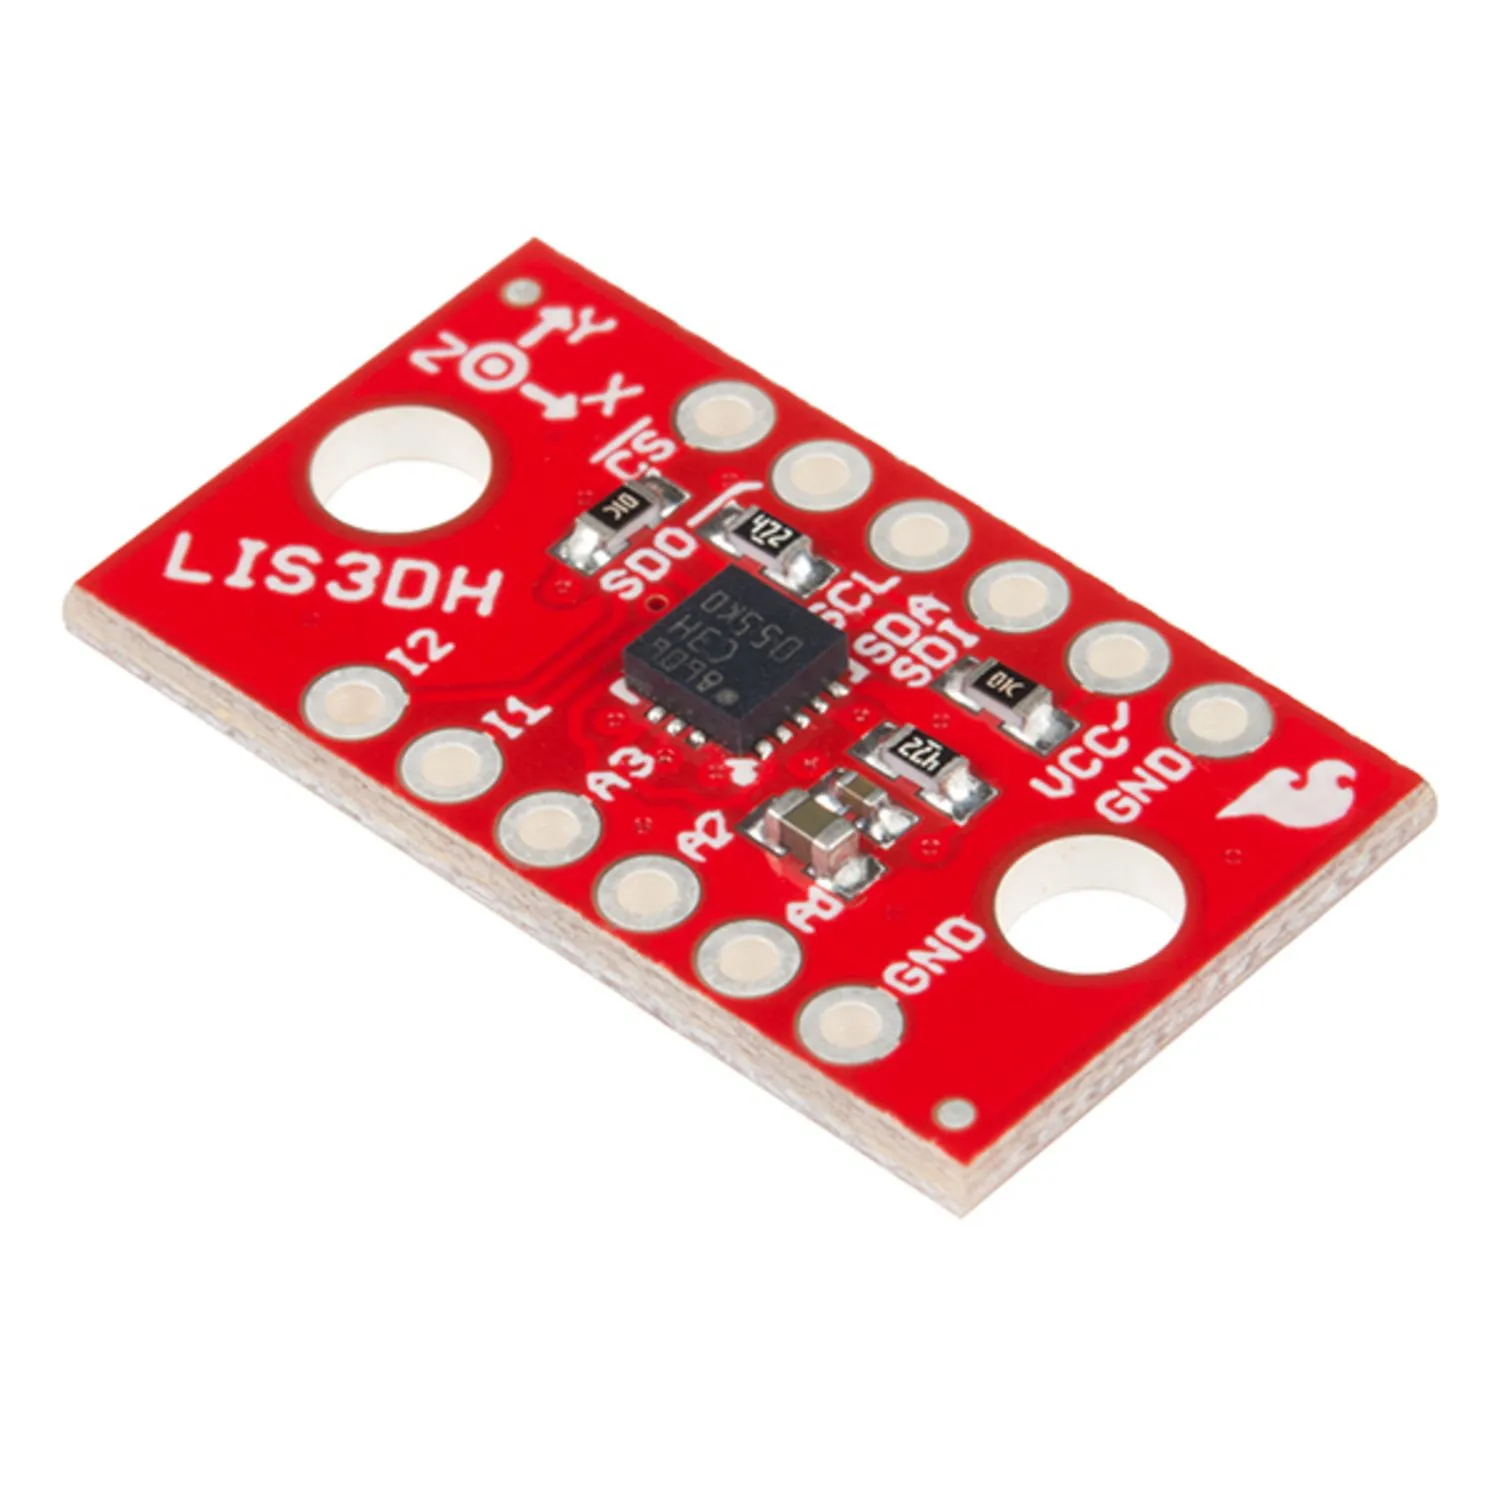 Photo of SparkFun Triple Axis Accelerometer Breakout - LIS3DH